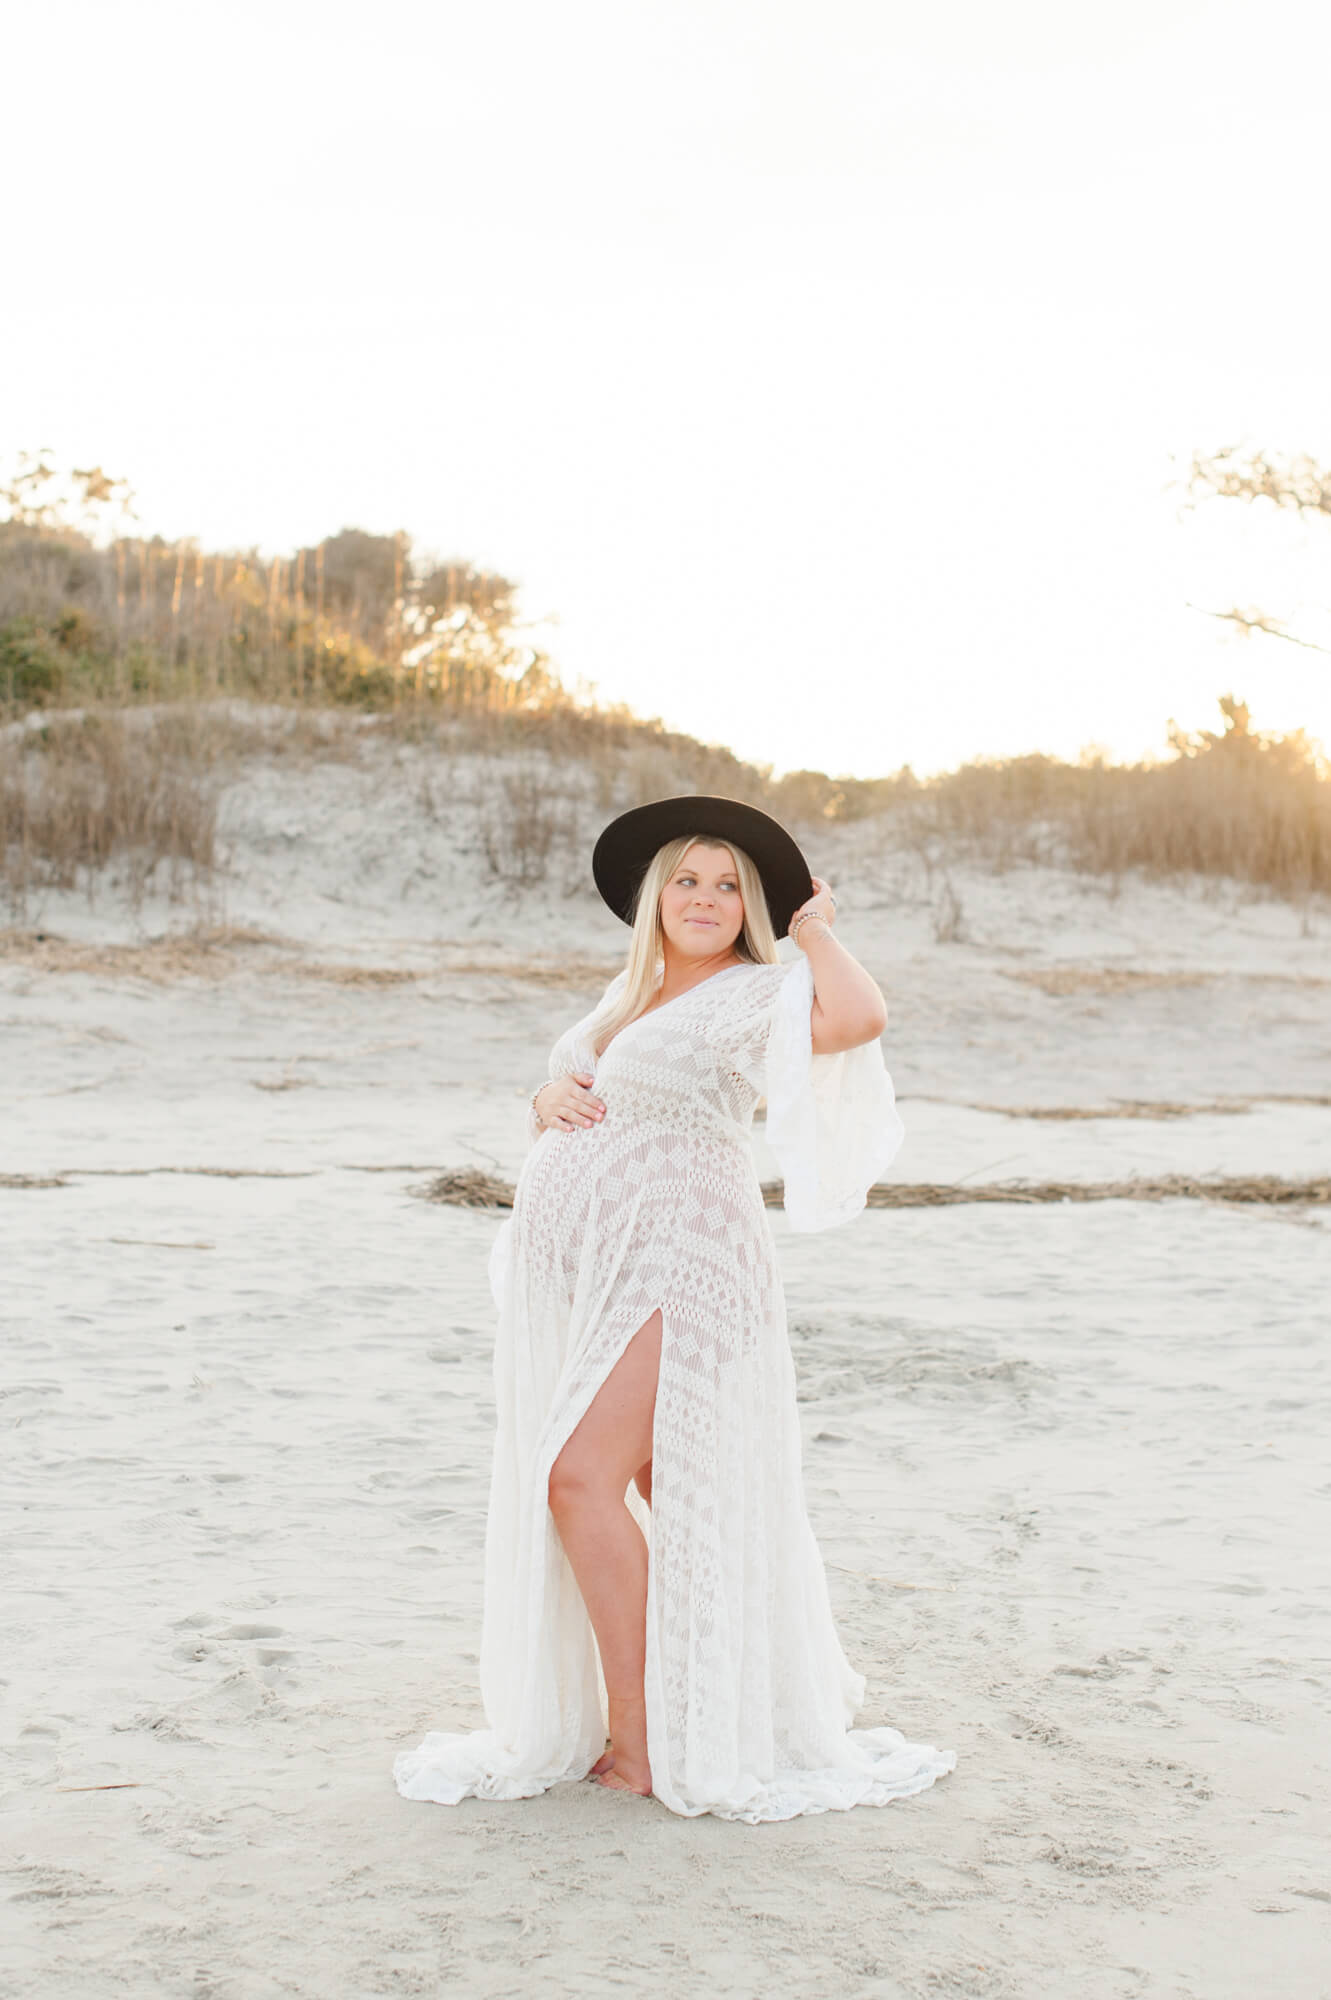 Beautiful new mother poses on the beach holding her wide brim hat and belly in a white lace gown!